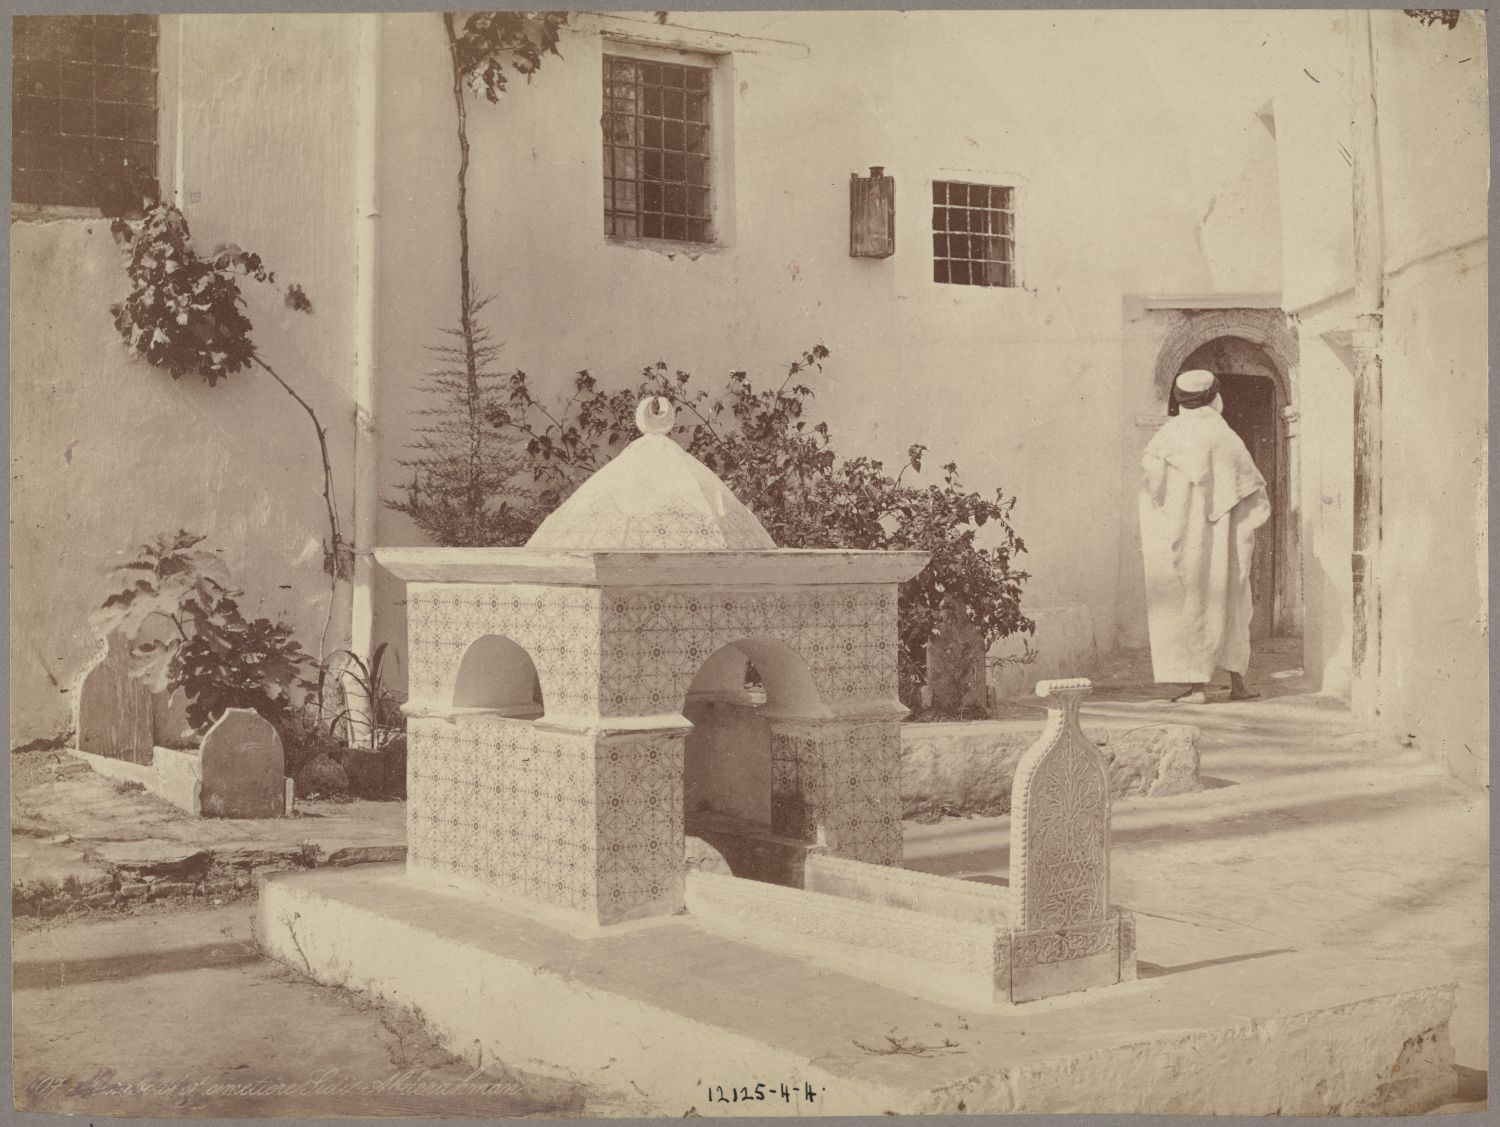 View of tombs and a man entering the door